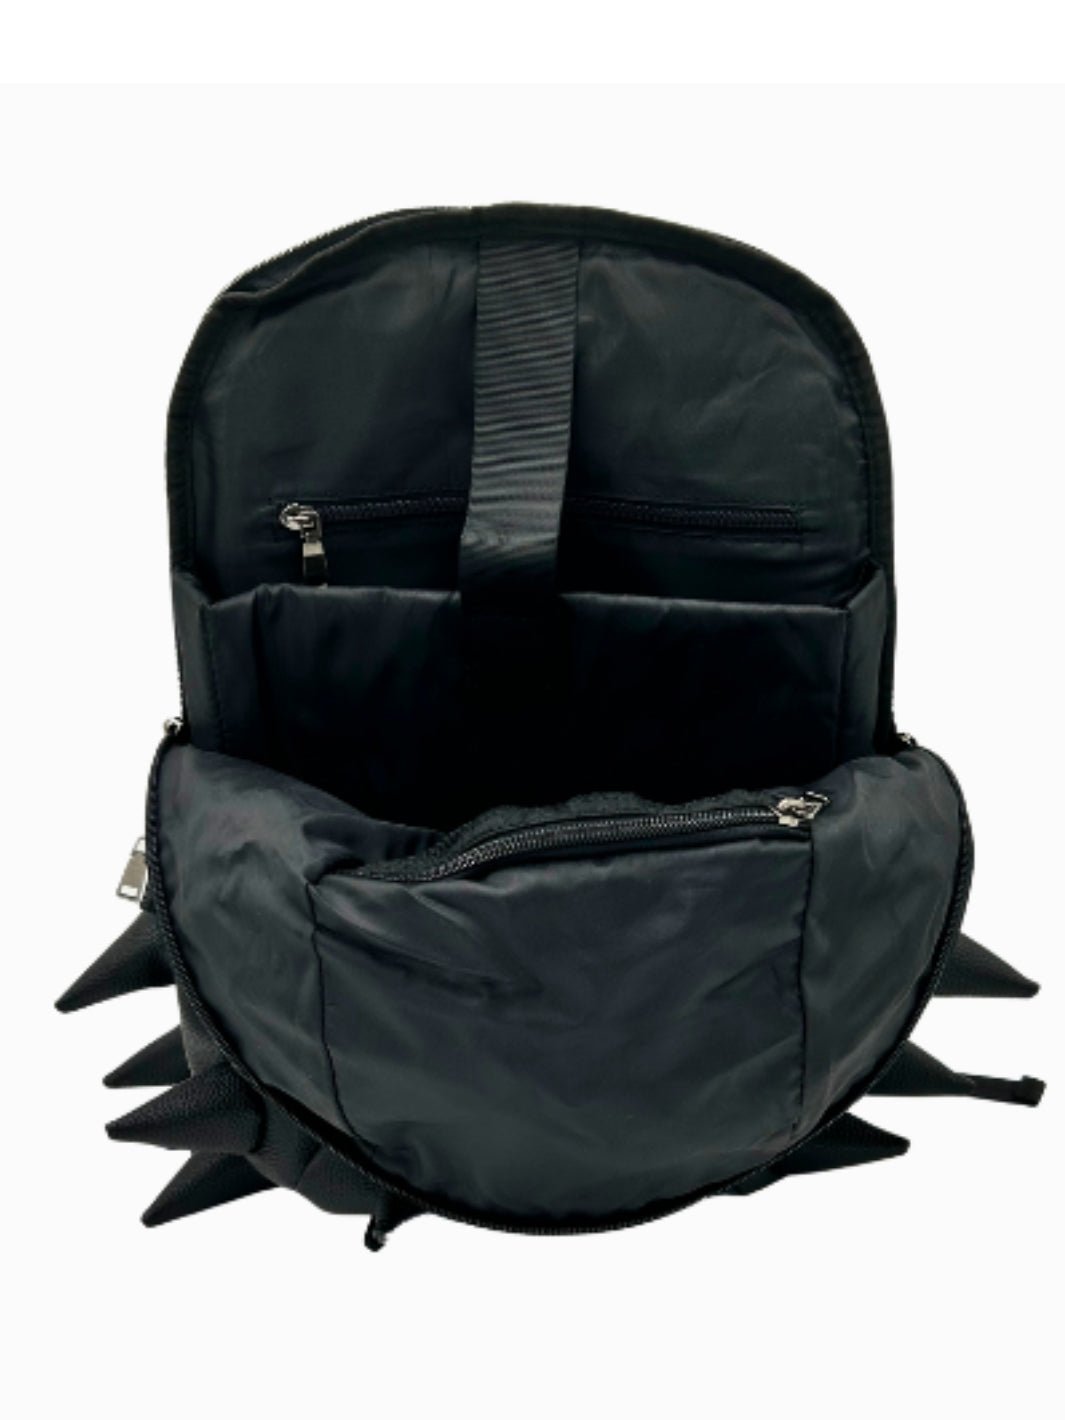 Laptop Compartment of Got Your Black - Black Backpack | Madpax